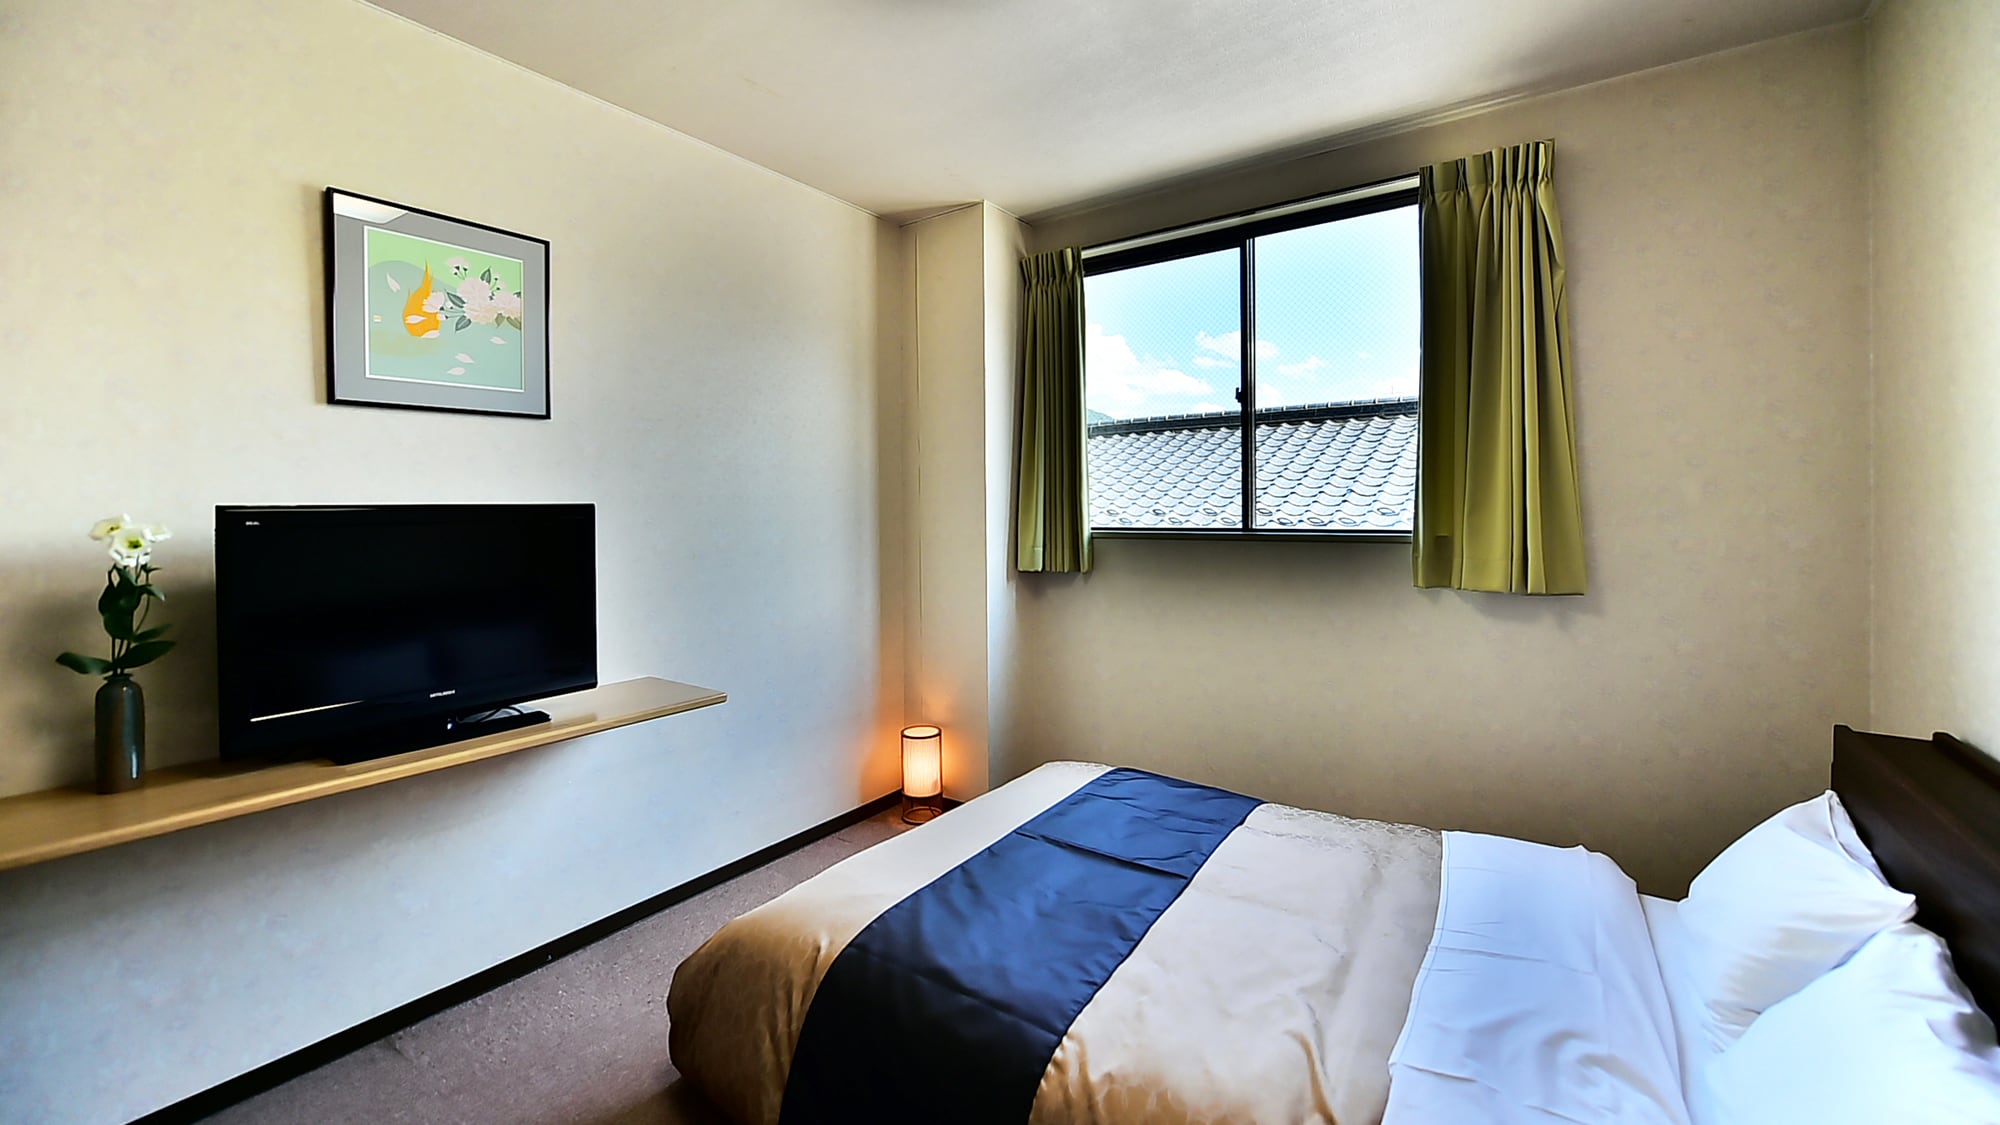  An example of a double room in the main building "Tozenkaku"